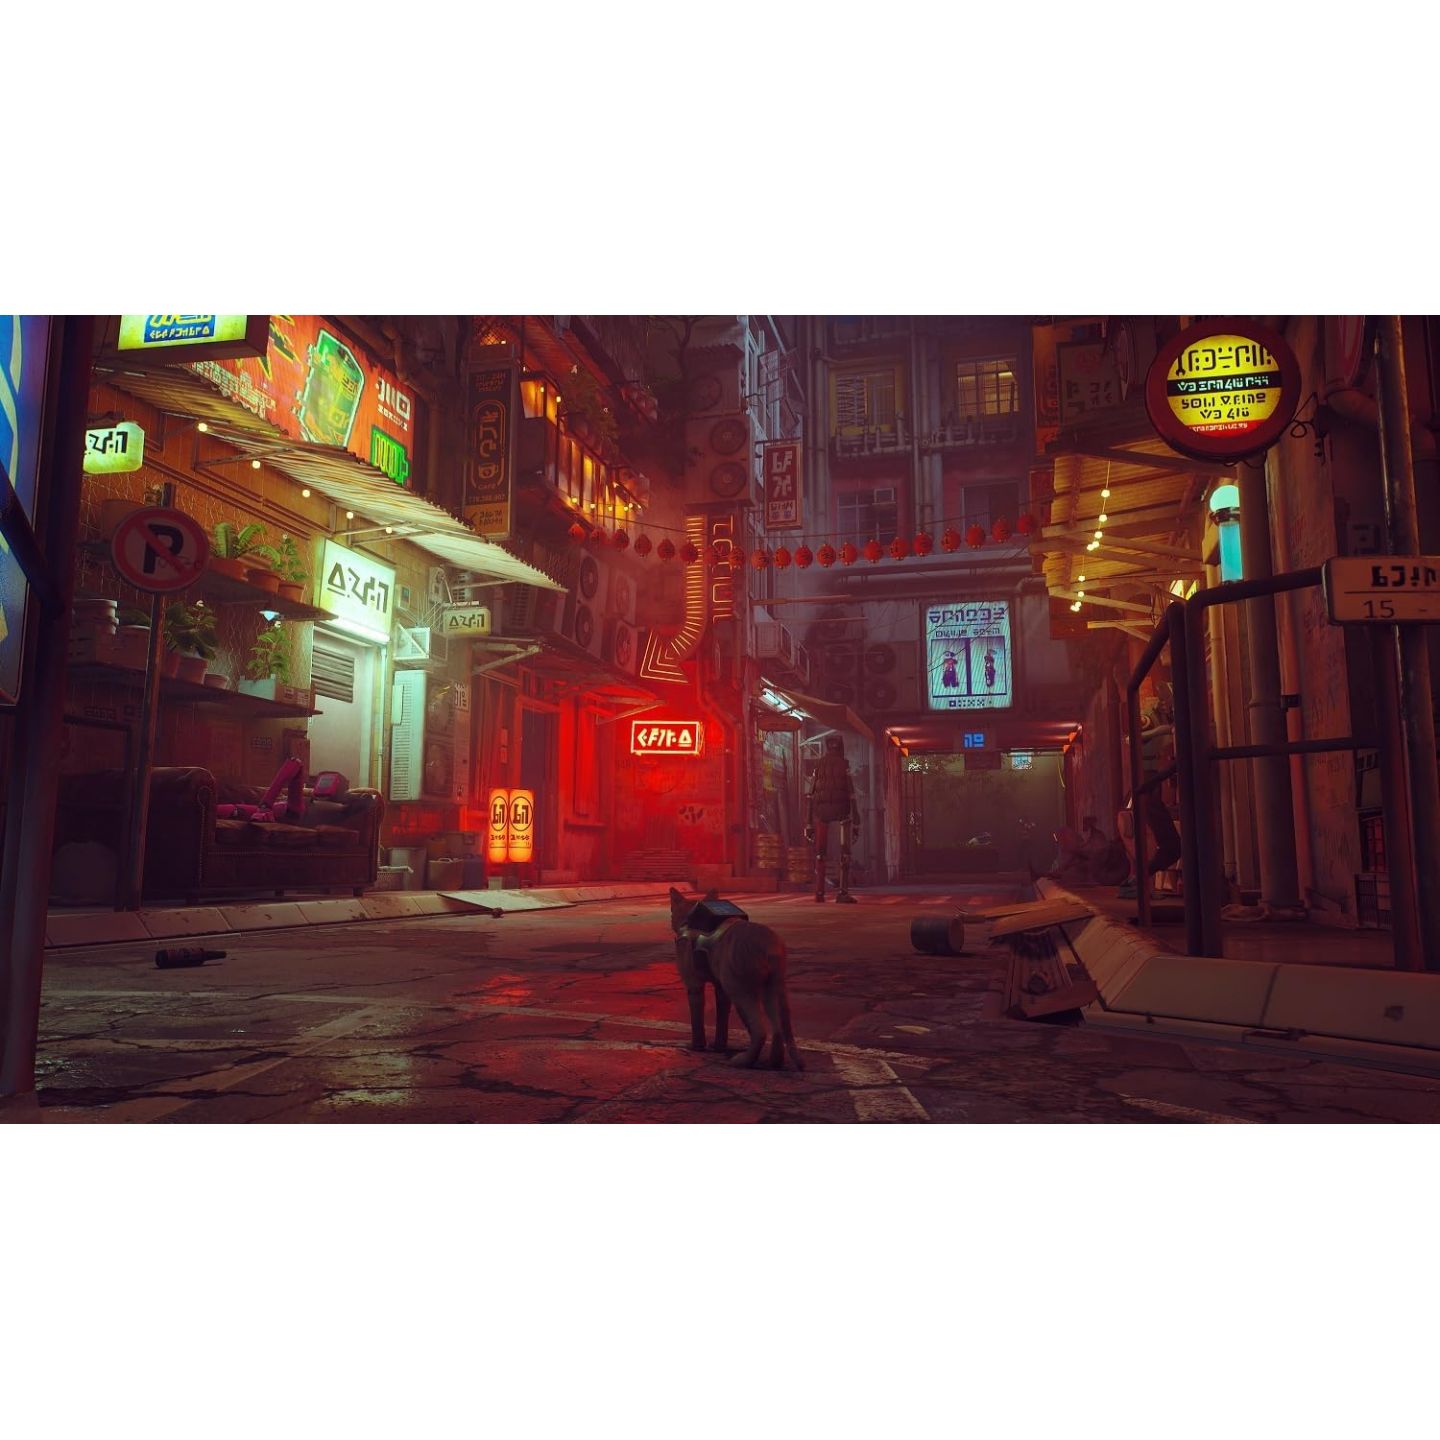 YESASIA: Stray (Special Edition) (Japan Version) - Happinet - PlayStation 5  (PS5) Games - Free Shipping - North America Site